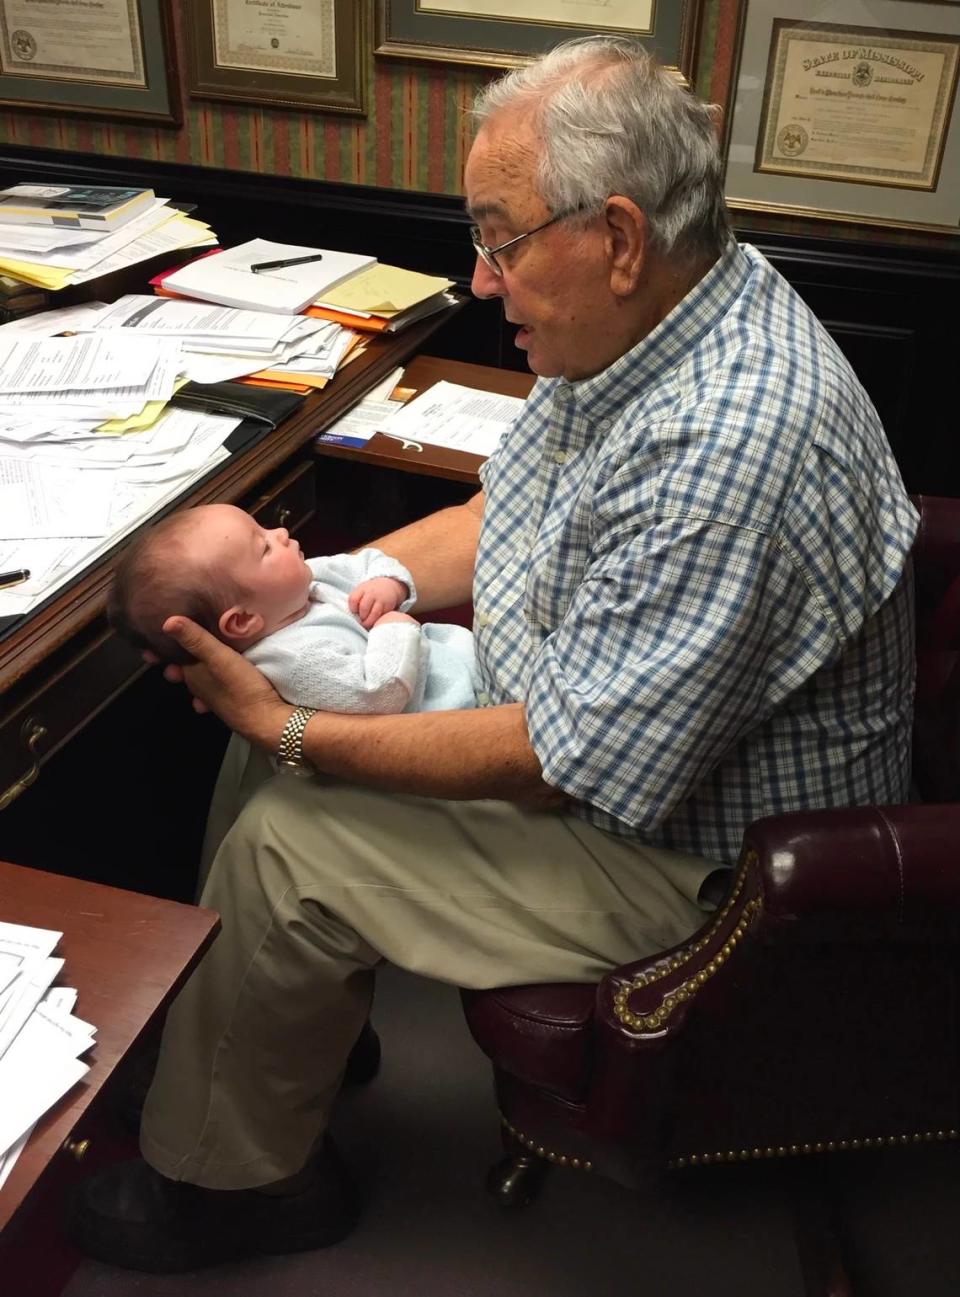 Albert Necaise with great-grandchild Ollie Sumrall.